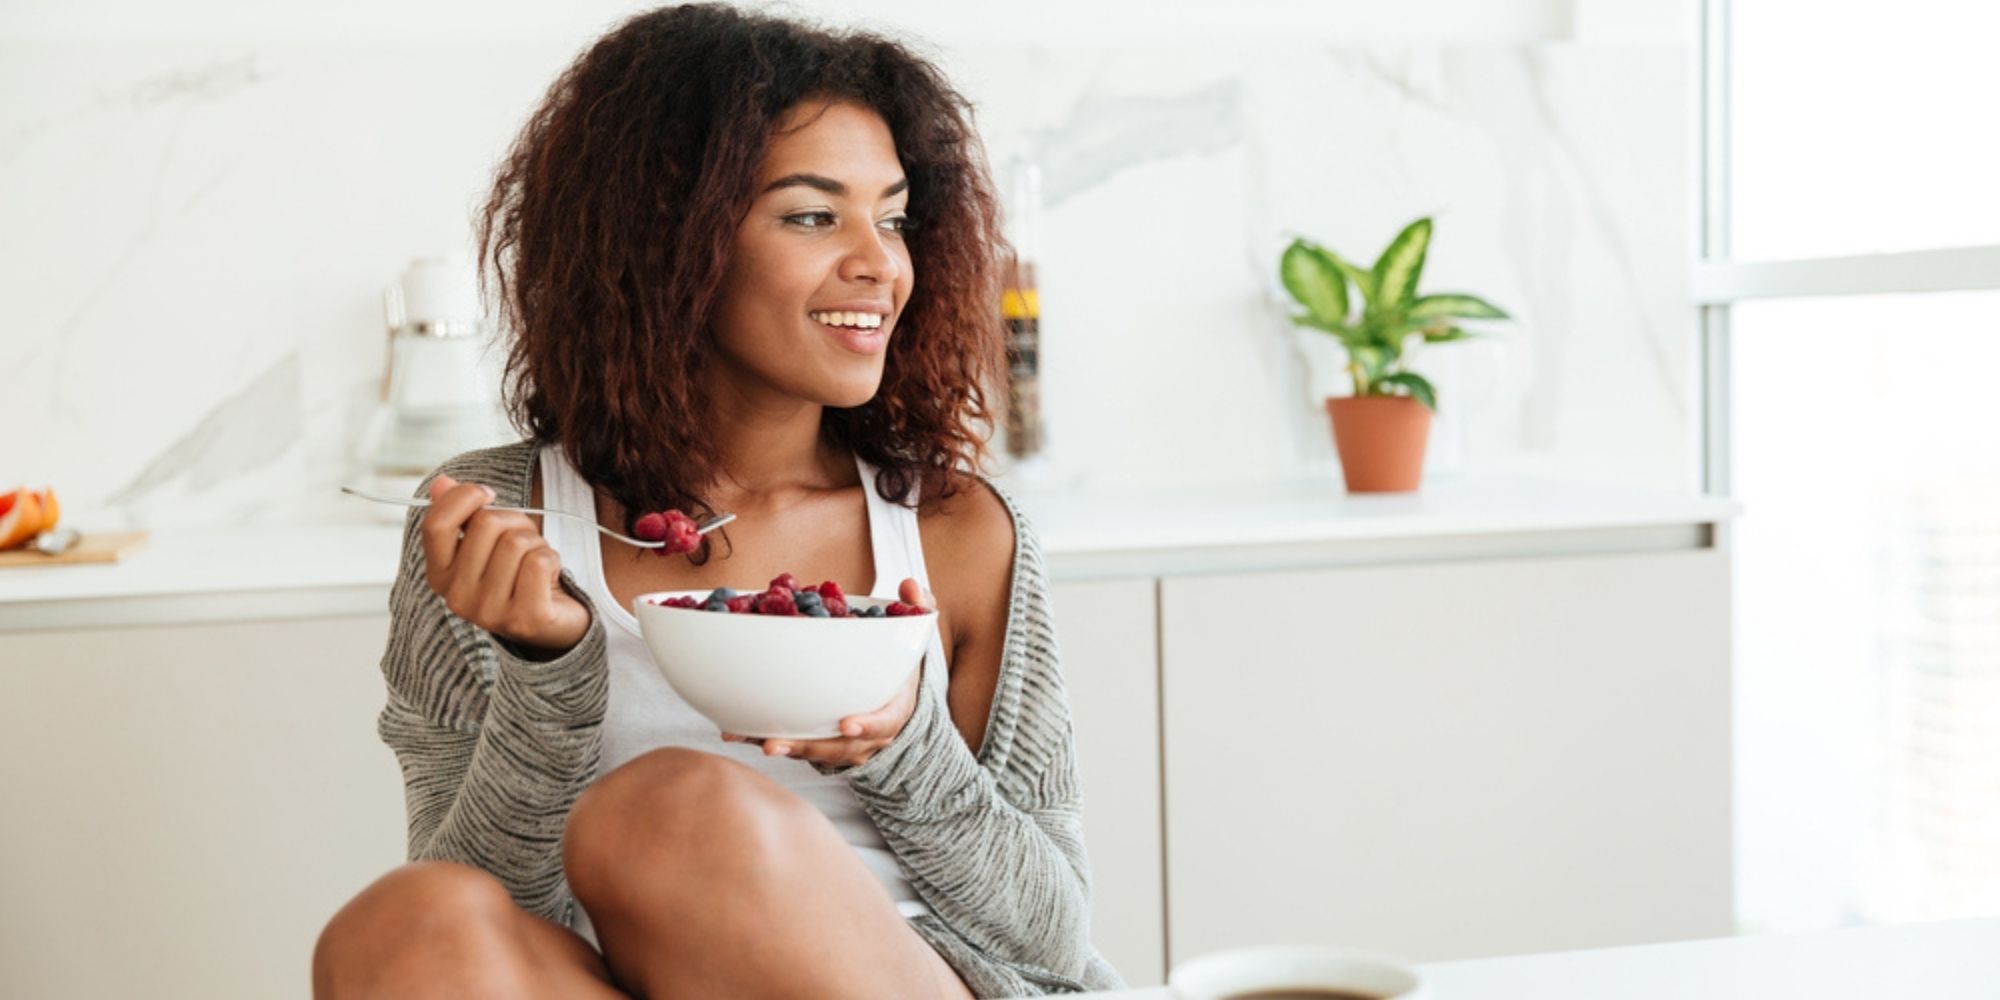 Woman with curly hair sitting at a white table eating a bowl of raspberries, strawberries, and blueberries